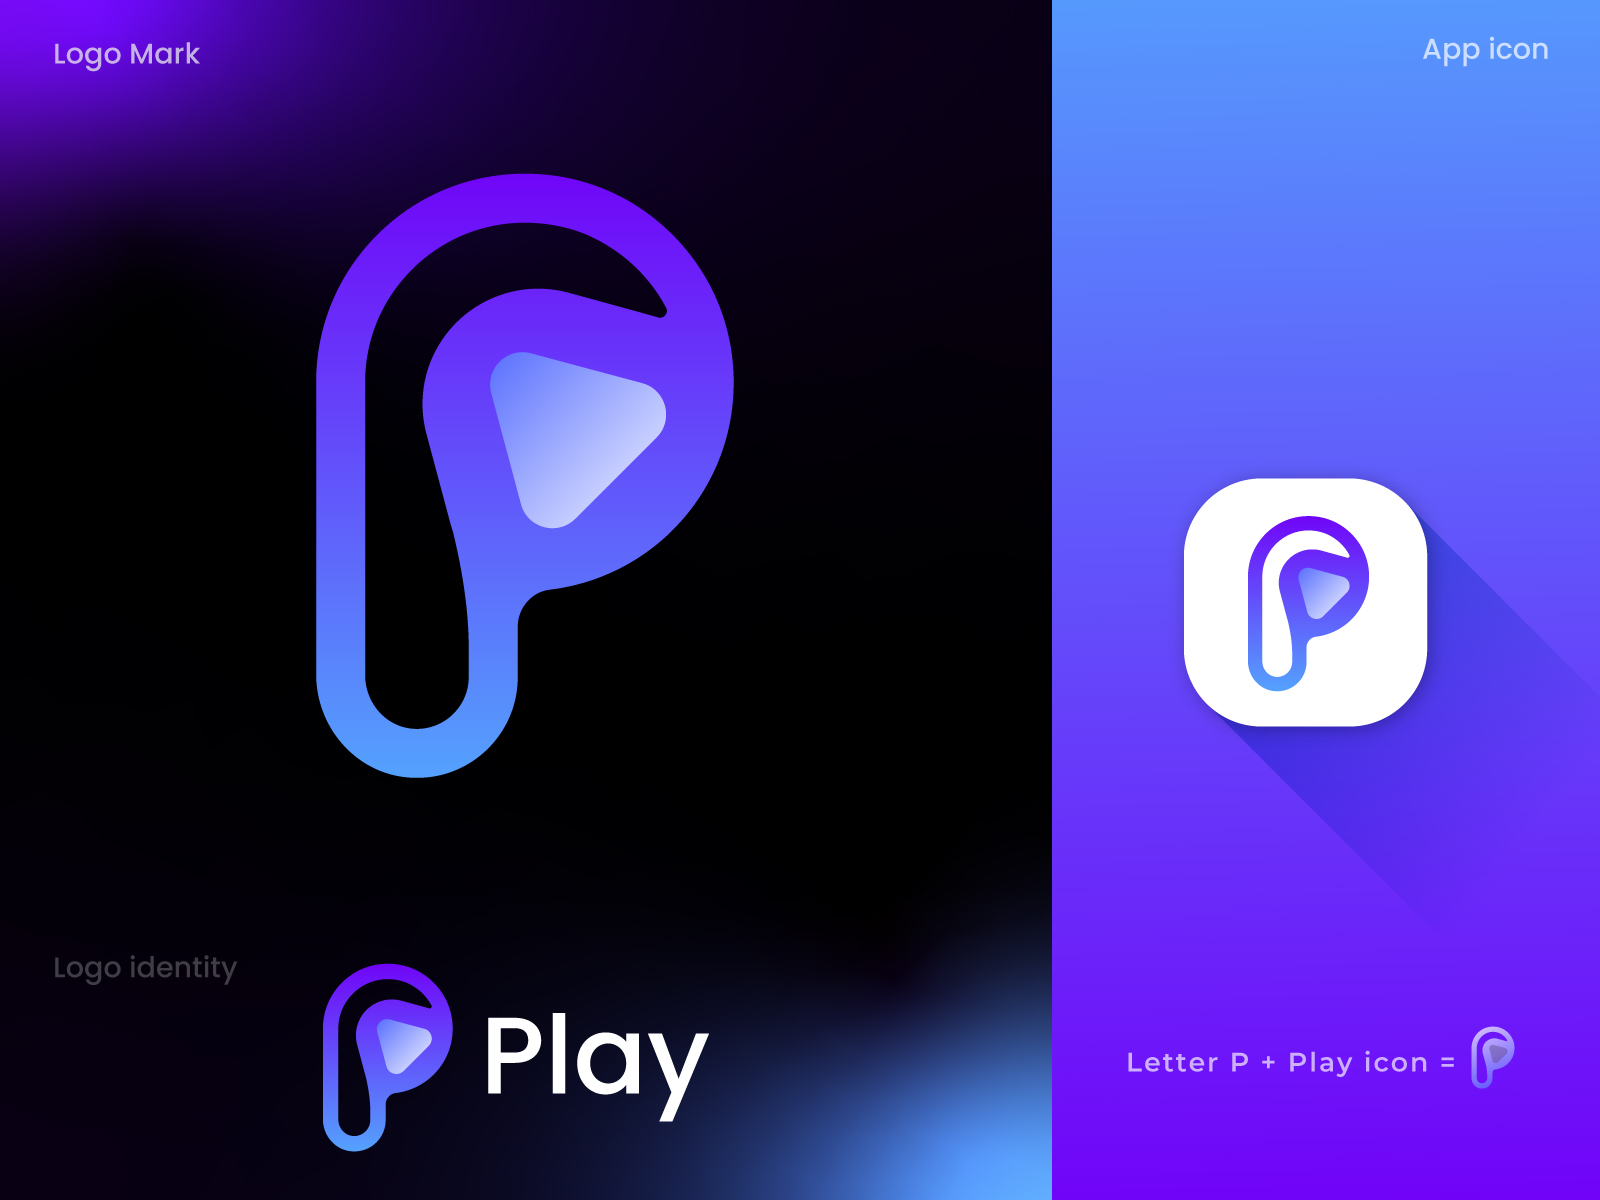 P letter - User Interface & Gesture Icons